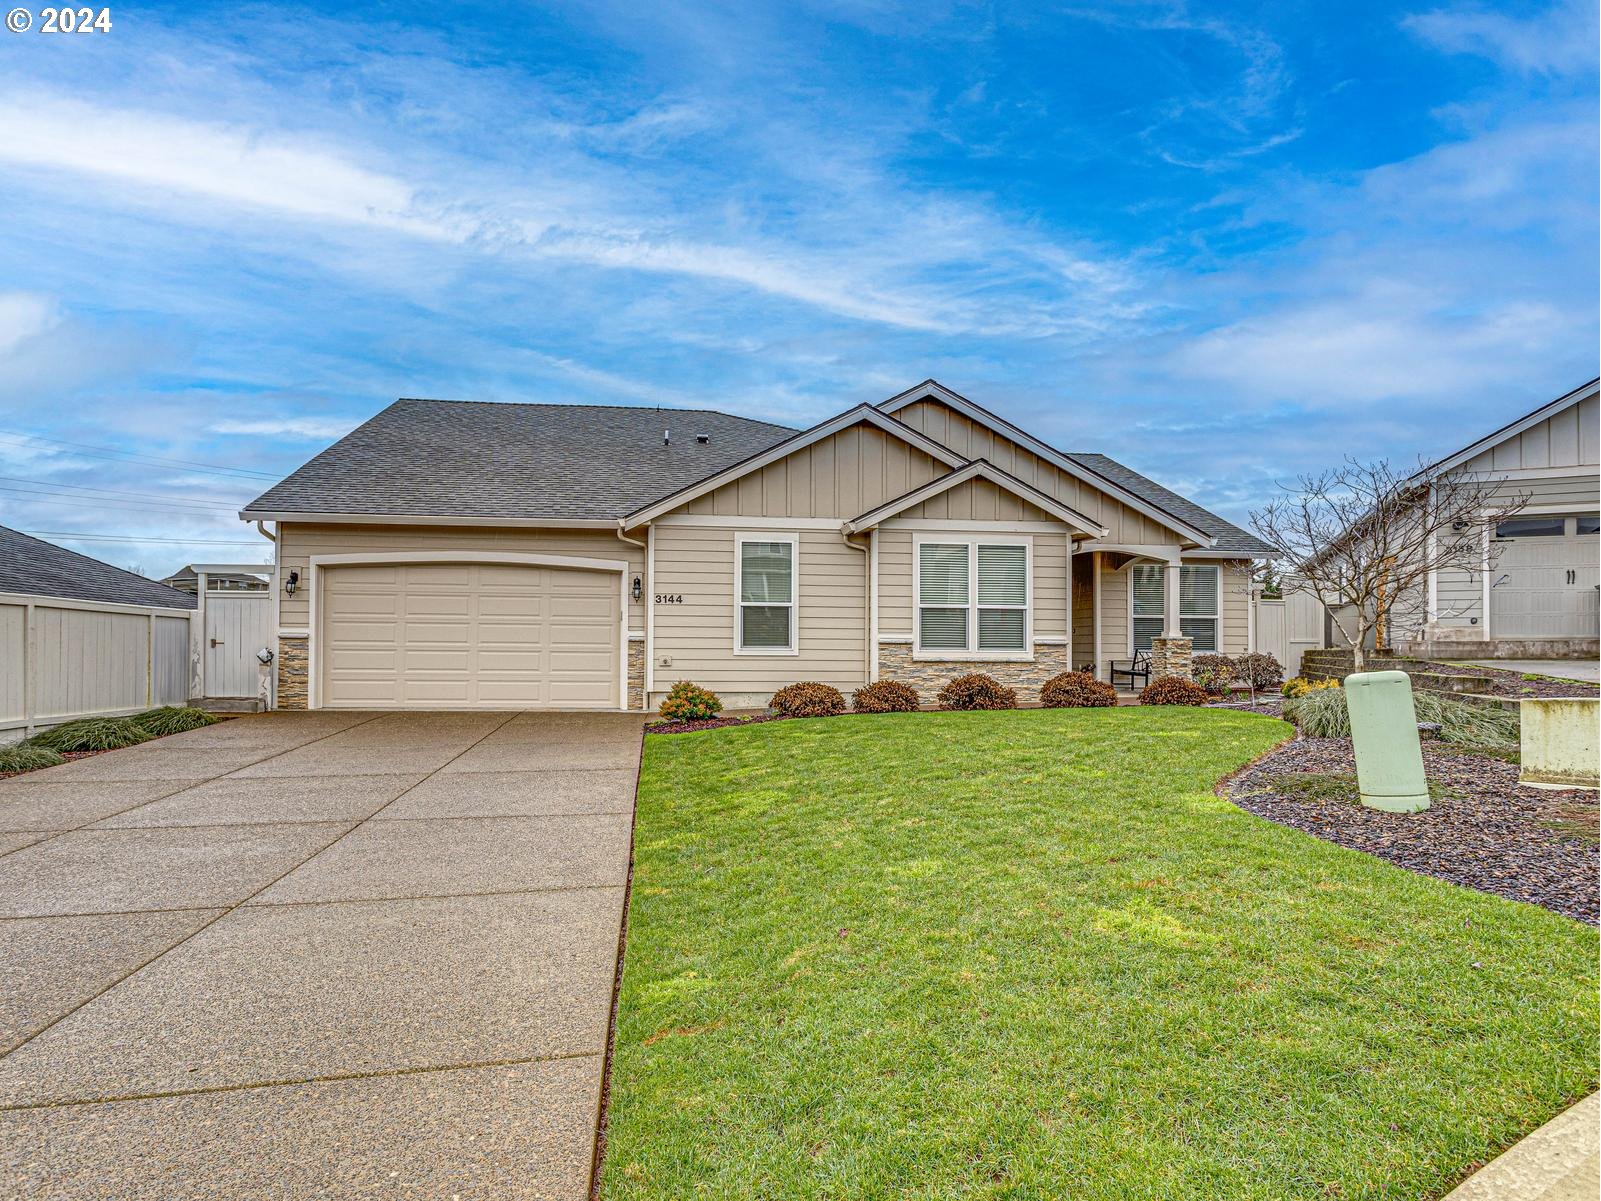 3144 EAGLE RAY CT NW, Salem, OR 